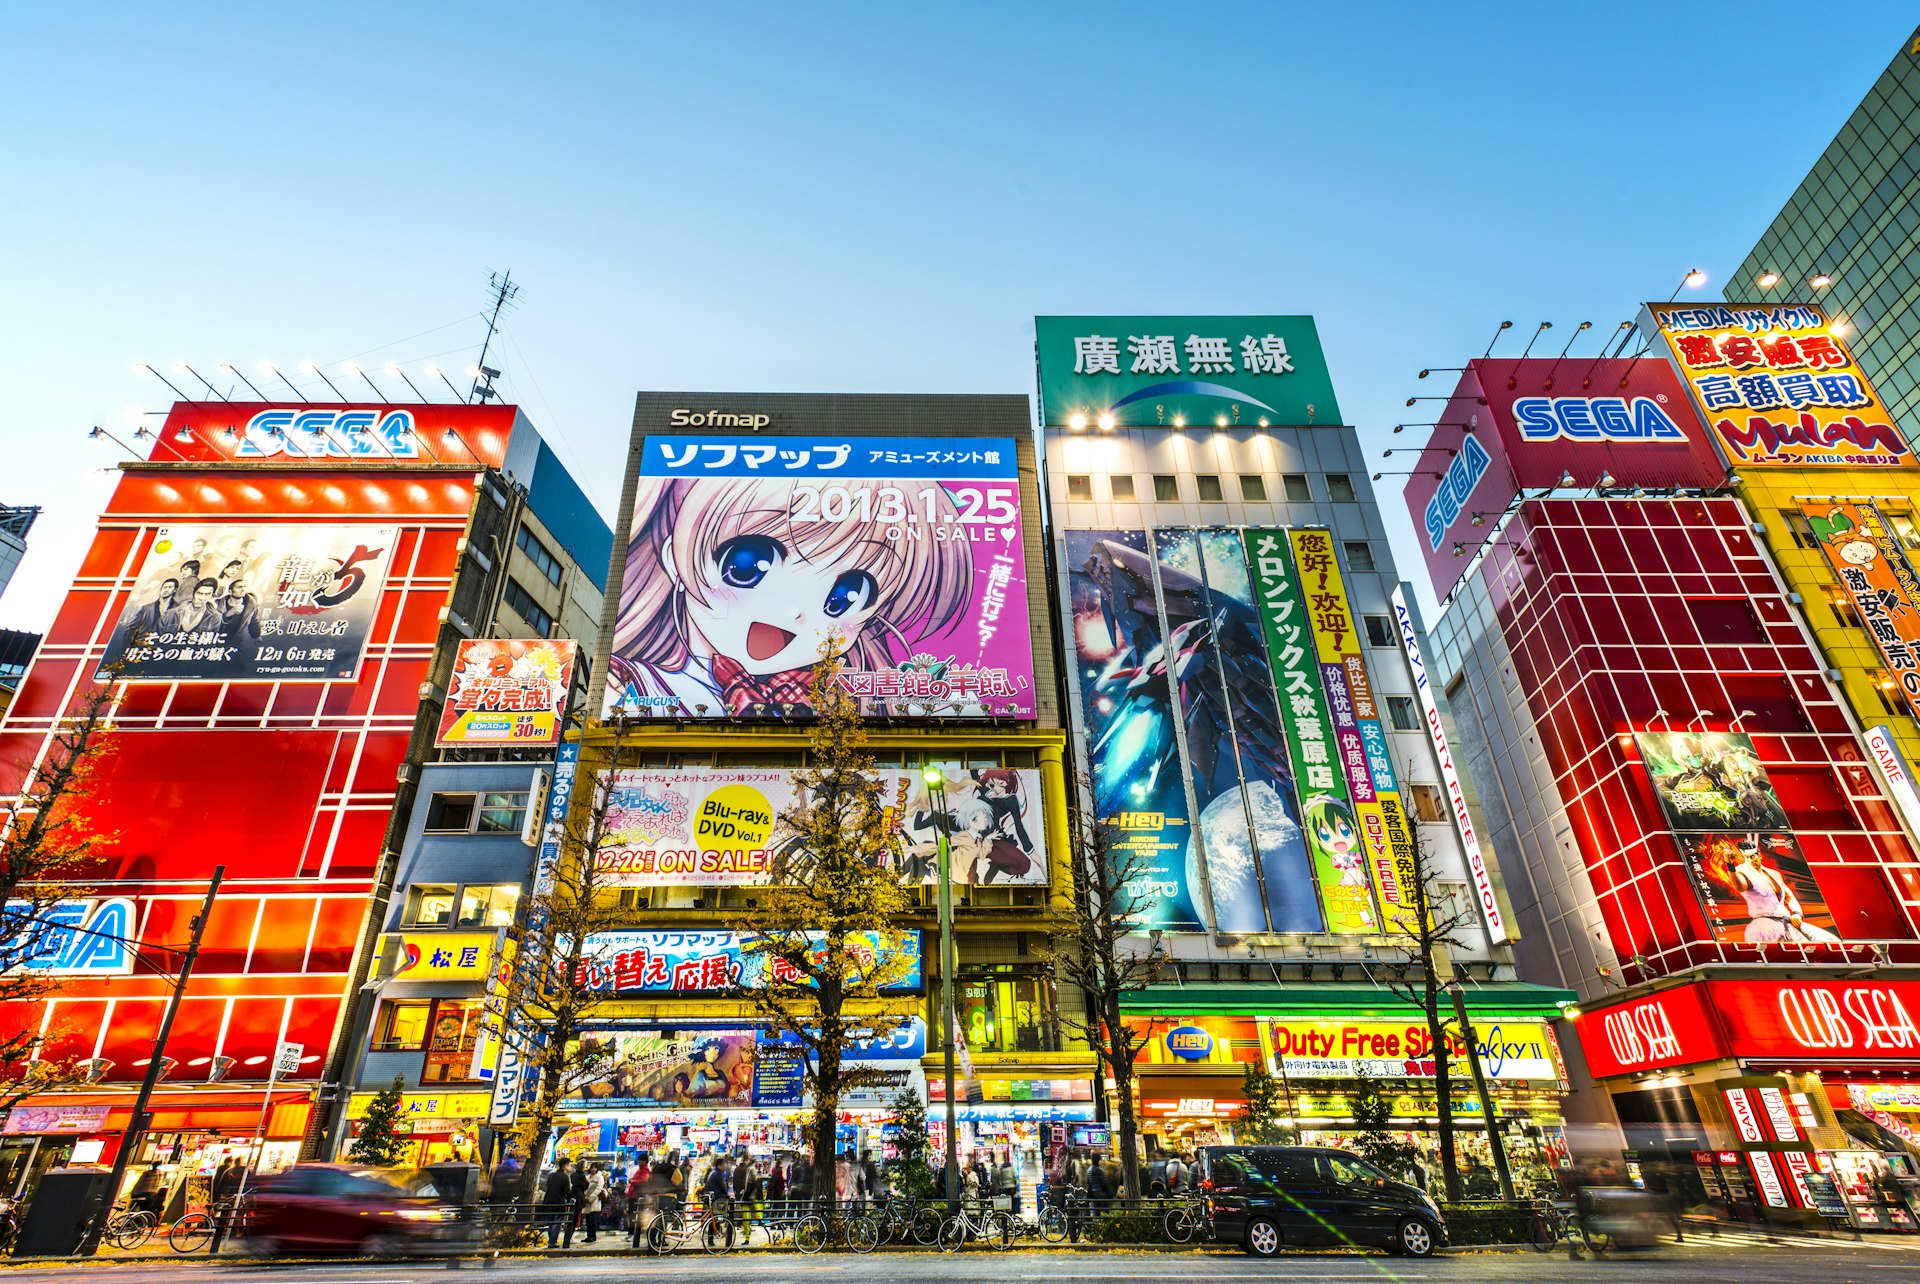 A run of shops with animae characters and video game stars blaze away in bright neon colours in Tokyo'sAkihabara district